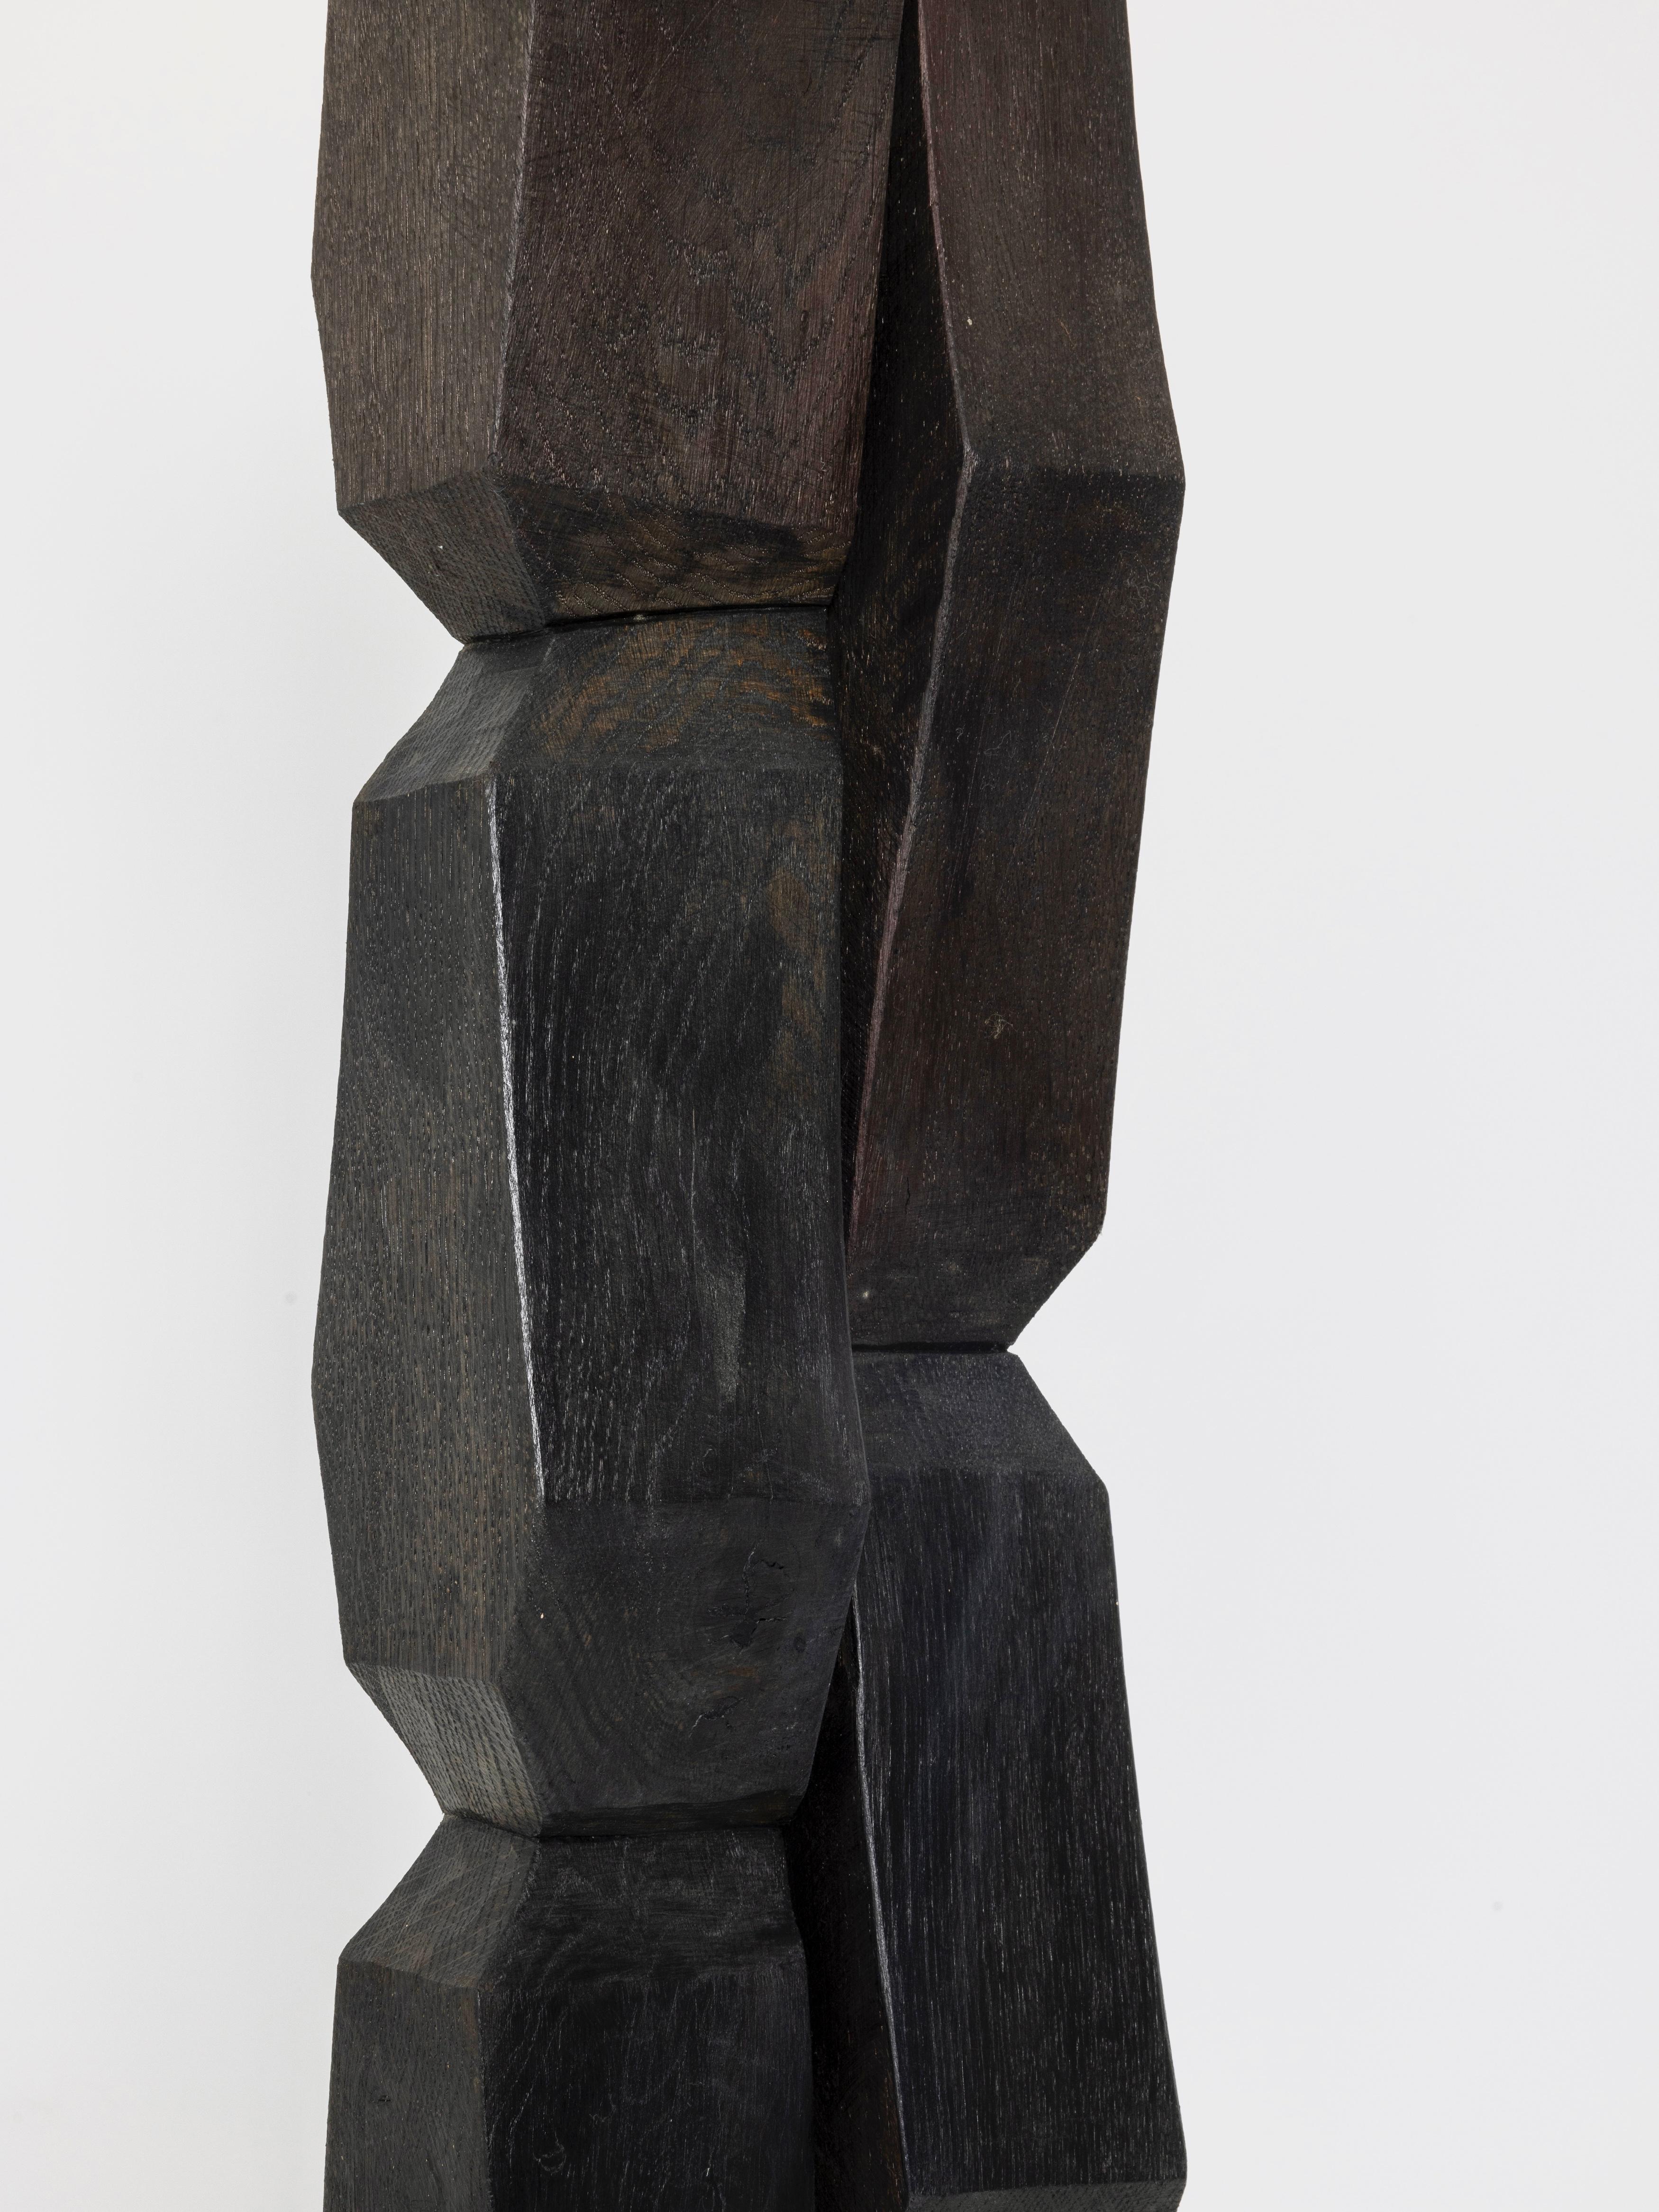 Contemporary Wooden Totem Sculpture by Bertrand Créac'h, France For Sale 6